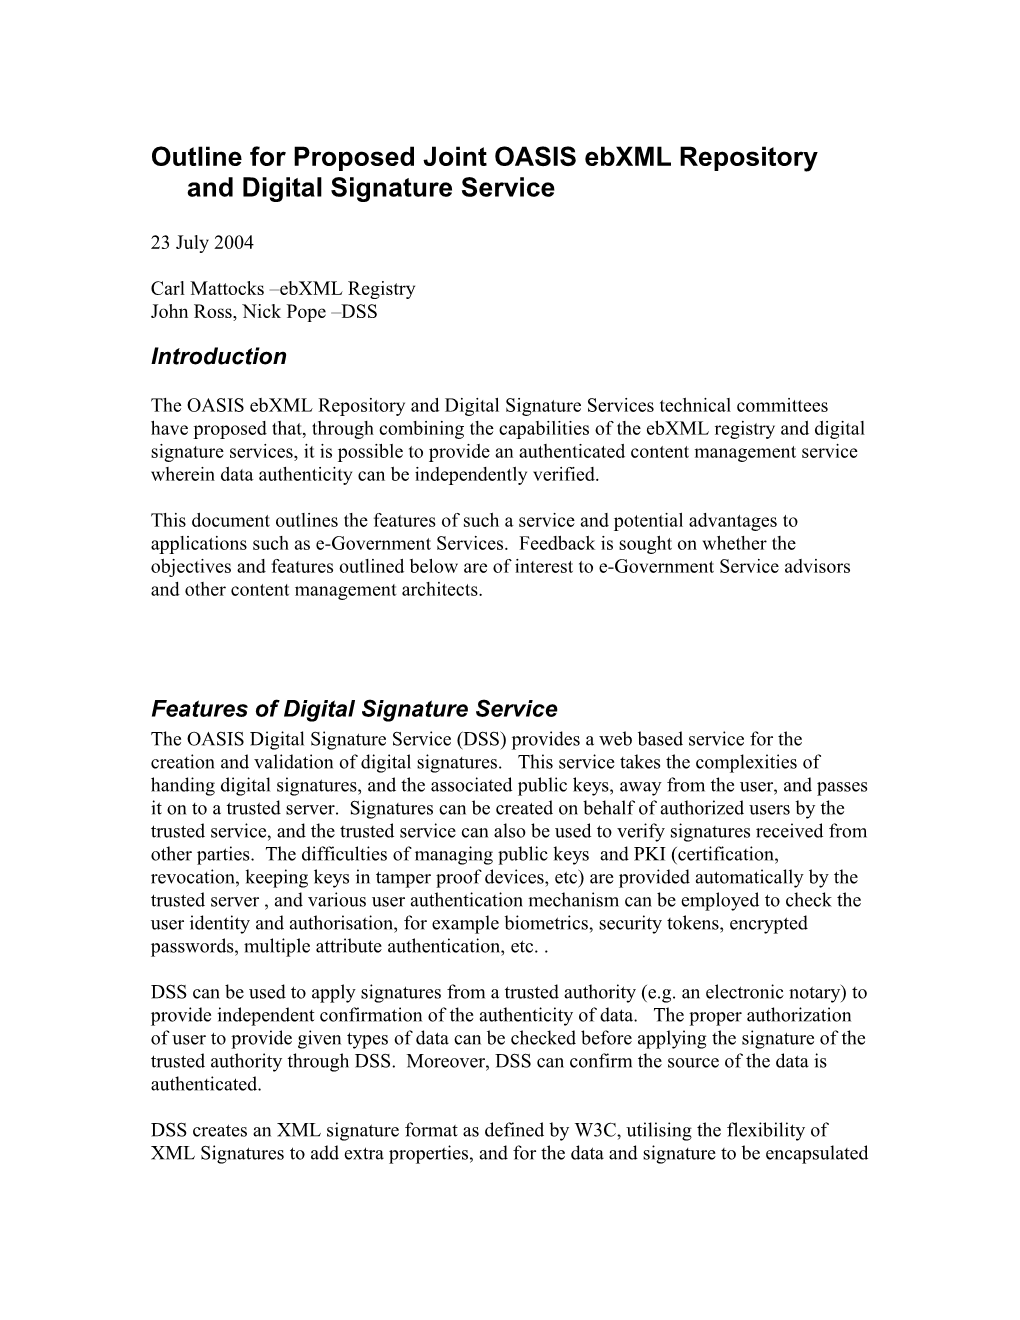 Outline for Proposed Joint Repository and Digital Signature Service